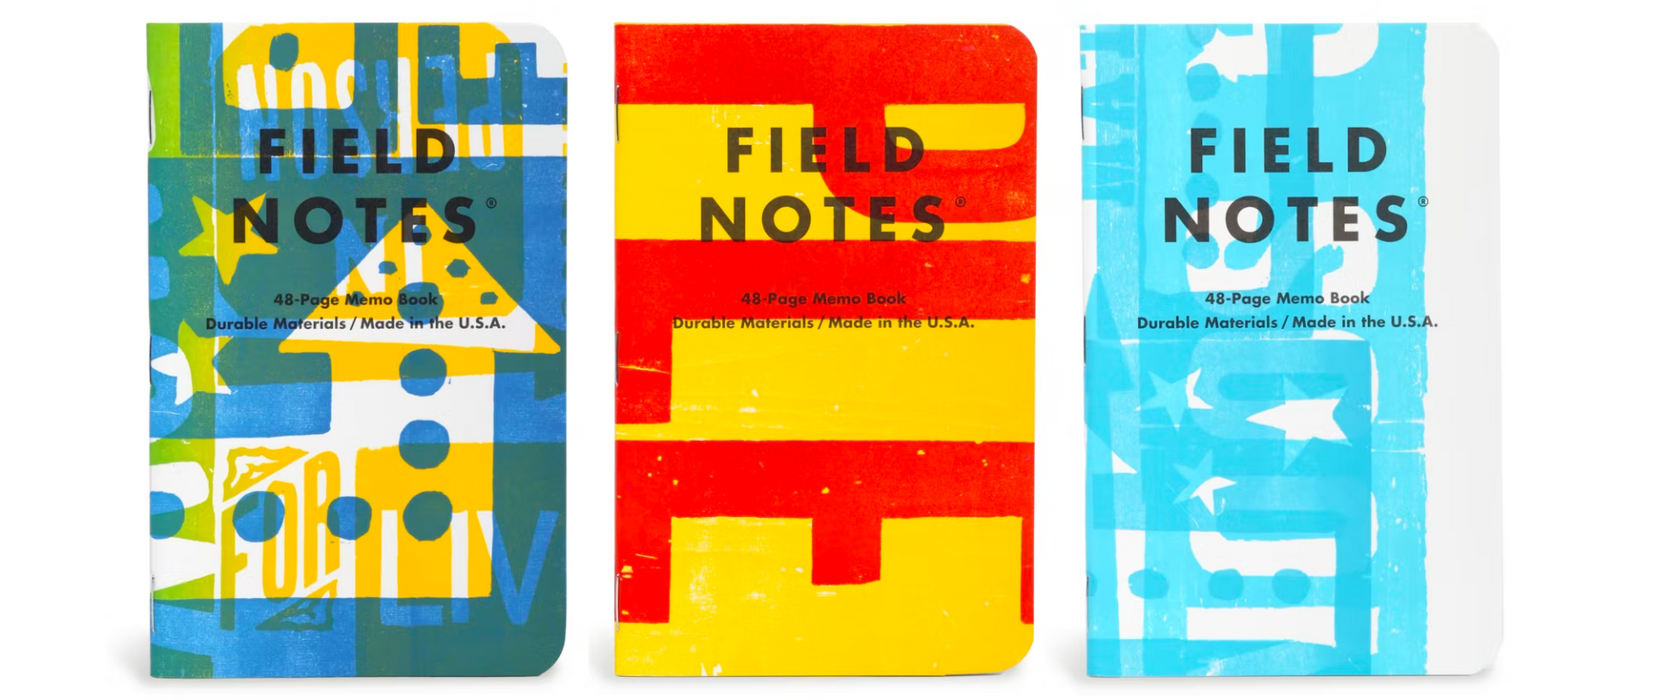 Field Notes Hatch Show Print Memo Books - 3 Pack